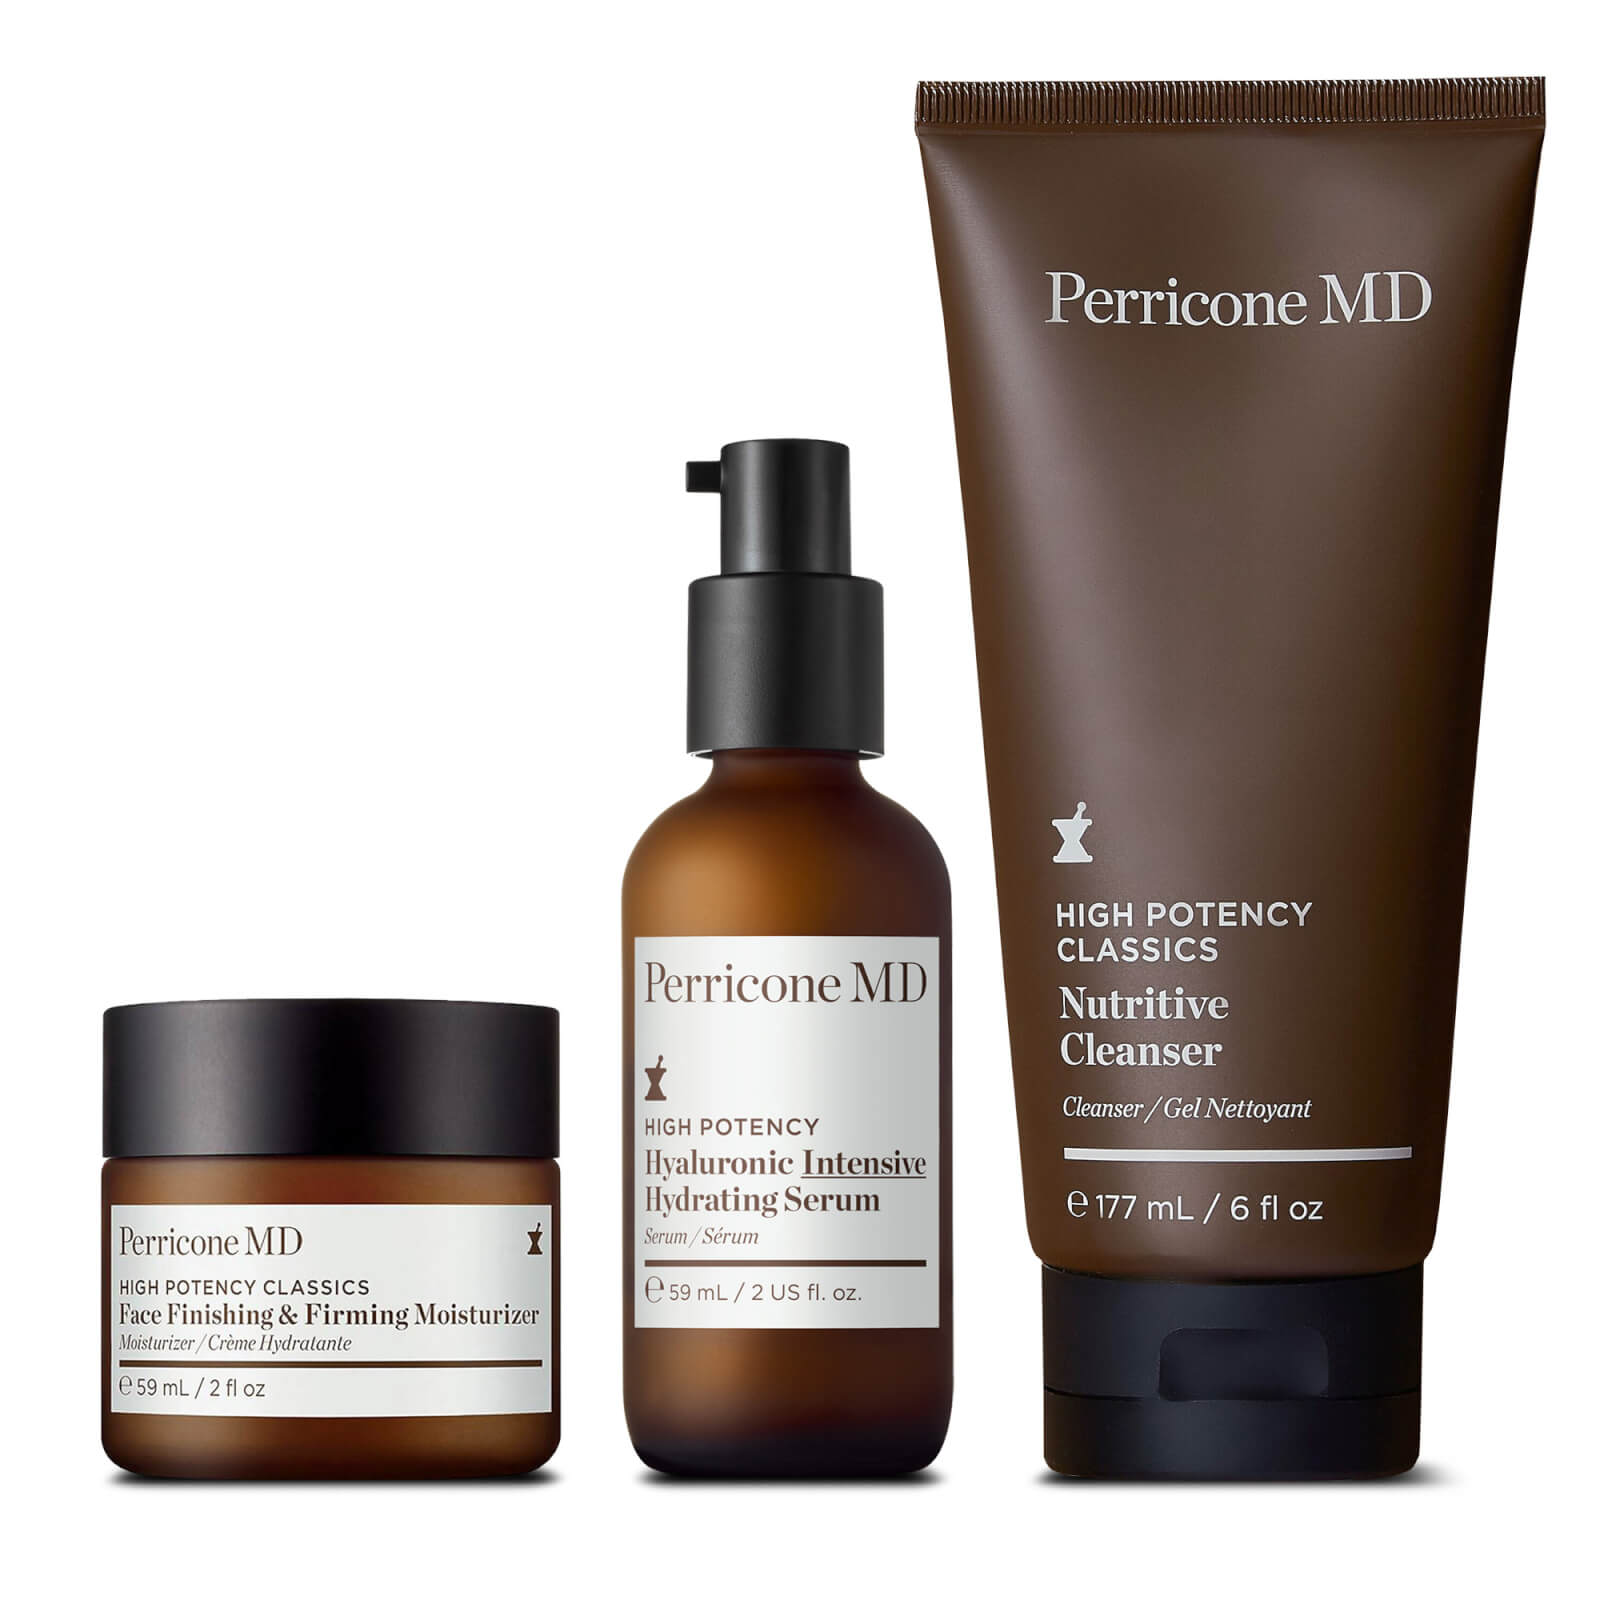 Perricone Md Cleanse & Firm Intensive Hydration Regimen